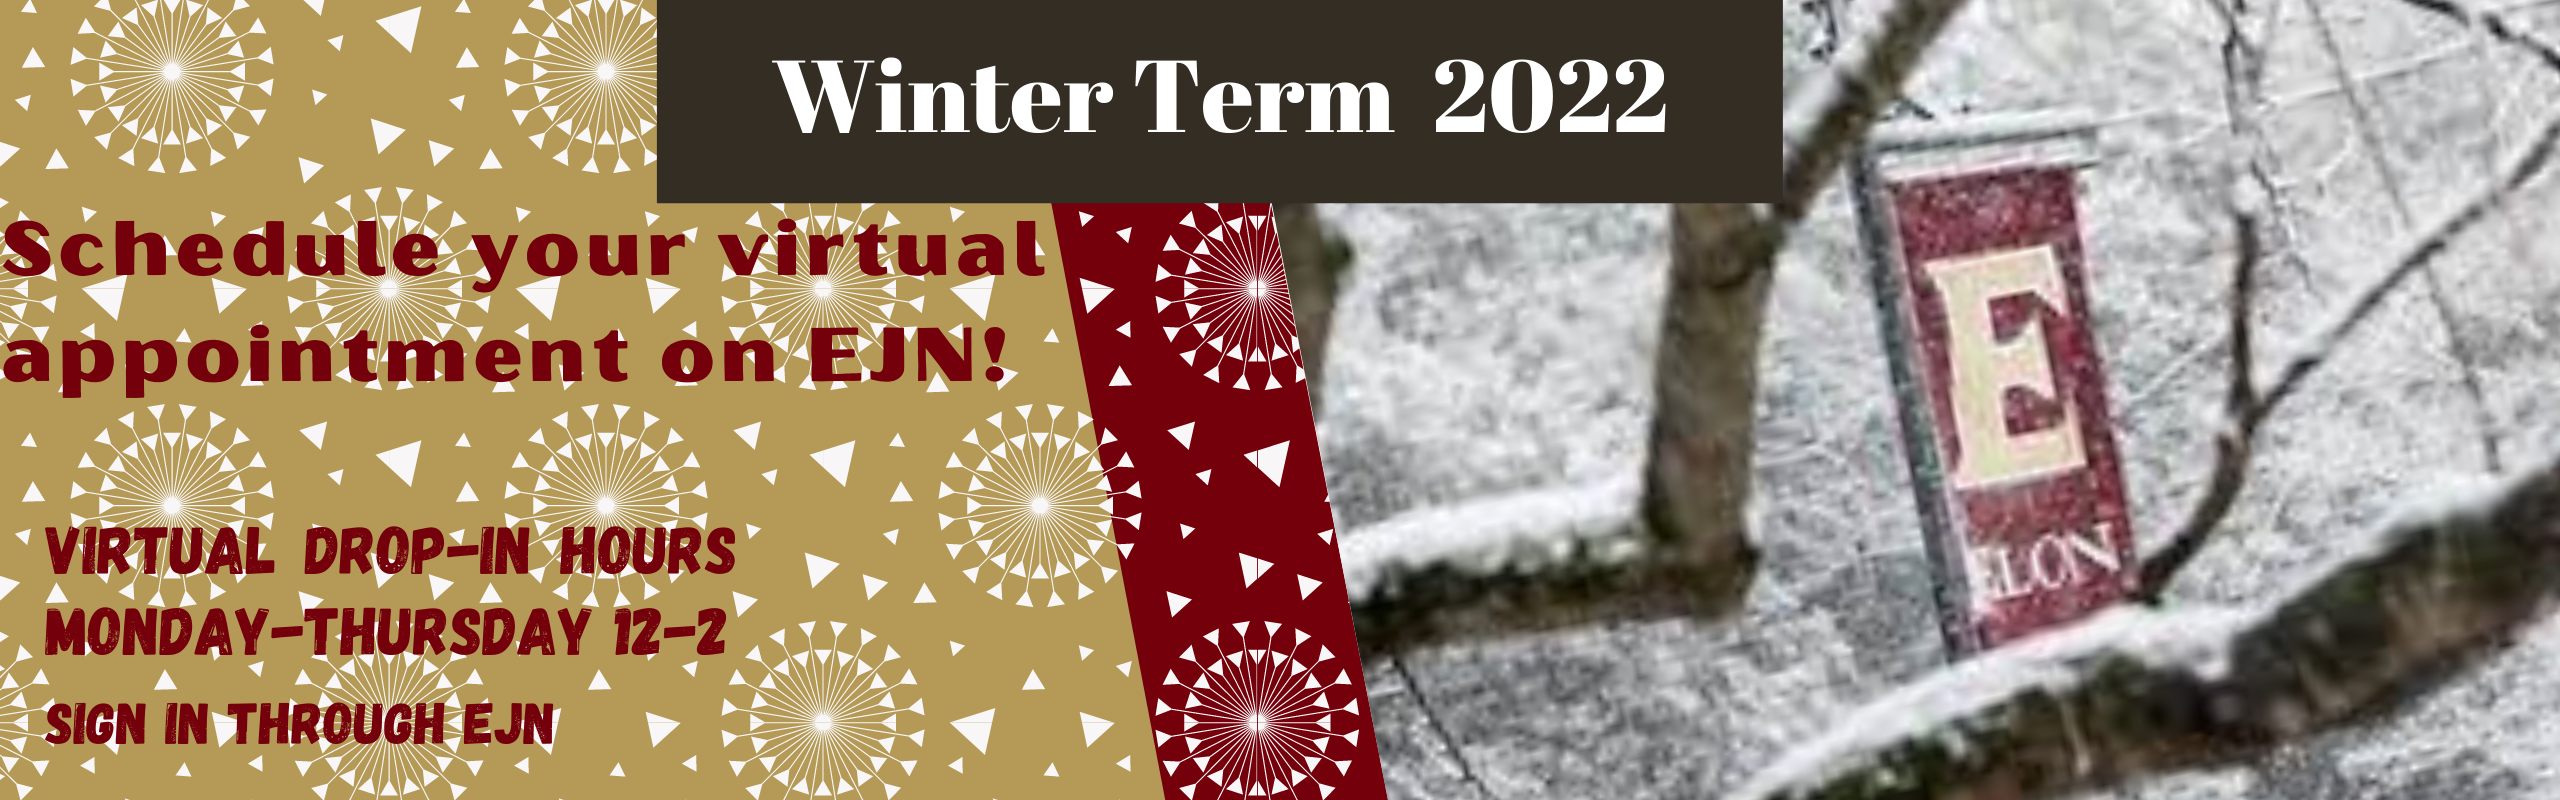 Winter Term 2022. Schedule your virtual appointment on EJN! Virtual drop-in hours Monday-Thursday 12-2. Sign in through EJN.